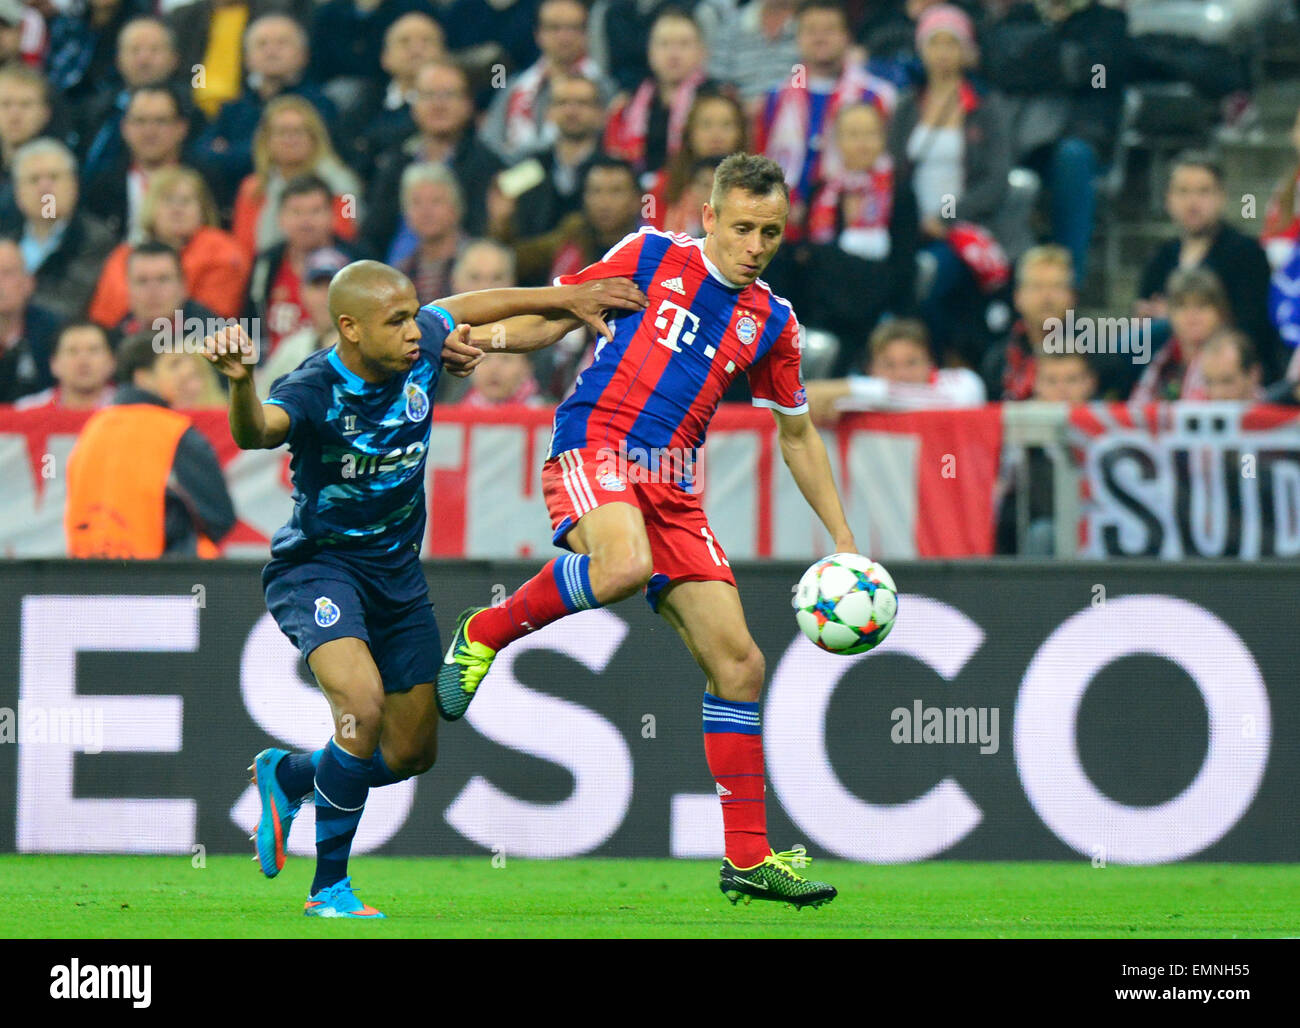 Munich's Rafinha (r) and Porto's Yacine Brahimi (l) compete for the ball during the Champions League quarter finals second leg soccer match between FC Bayern Munich and FC Porto in the Arena in Munich, Germany, 21 April 2015. Bayern Munich won 6-1. Photo: Marc Mueller/dpa Stock Photo